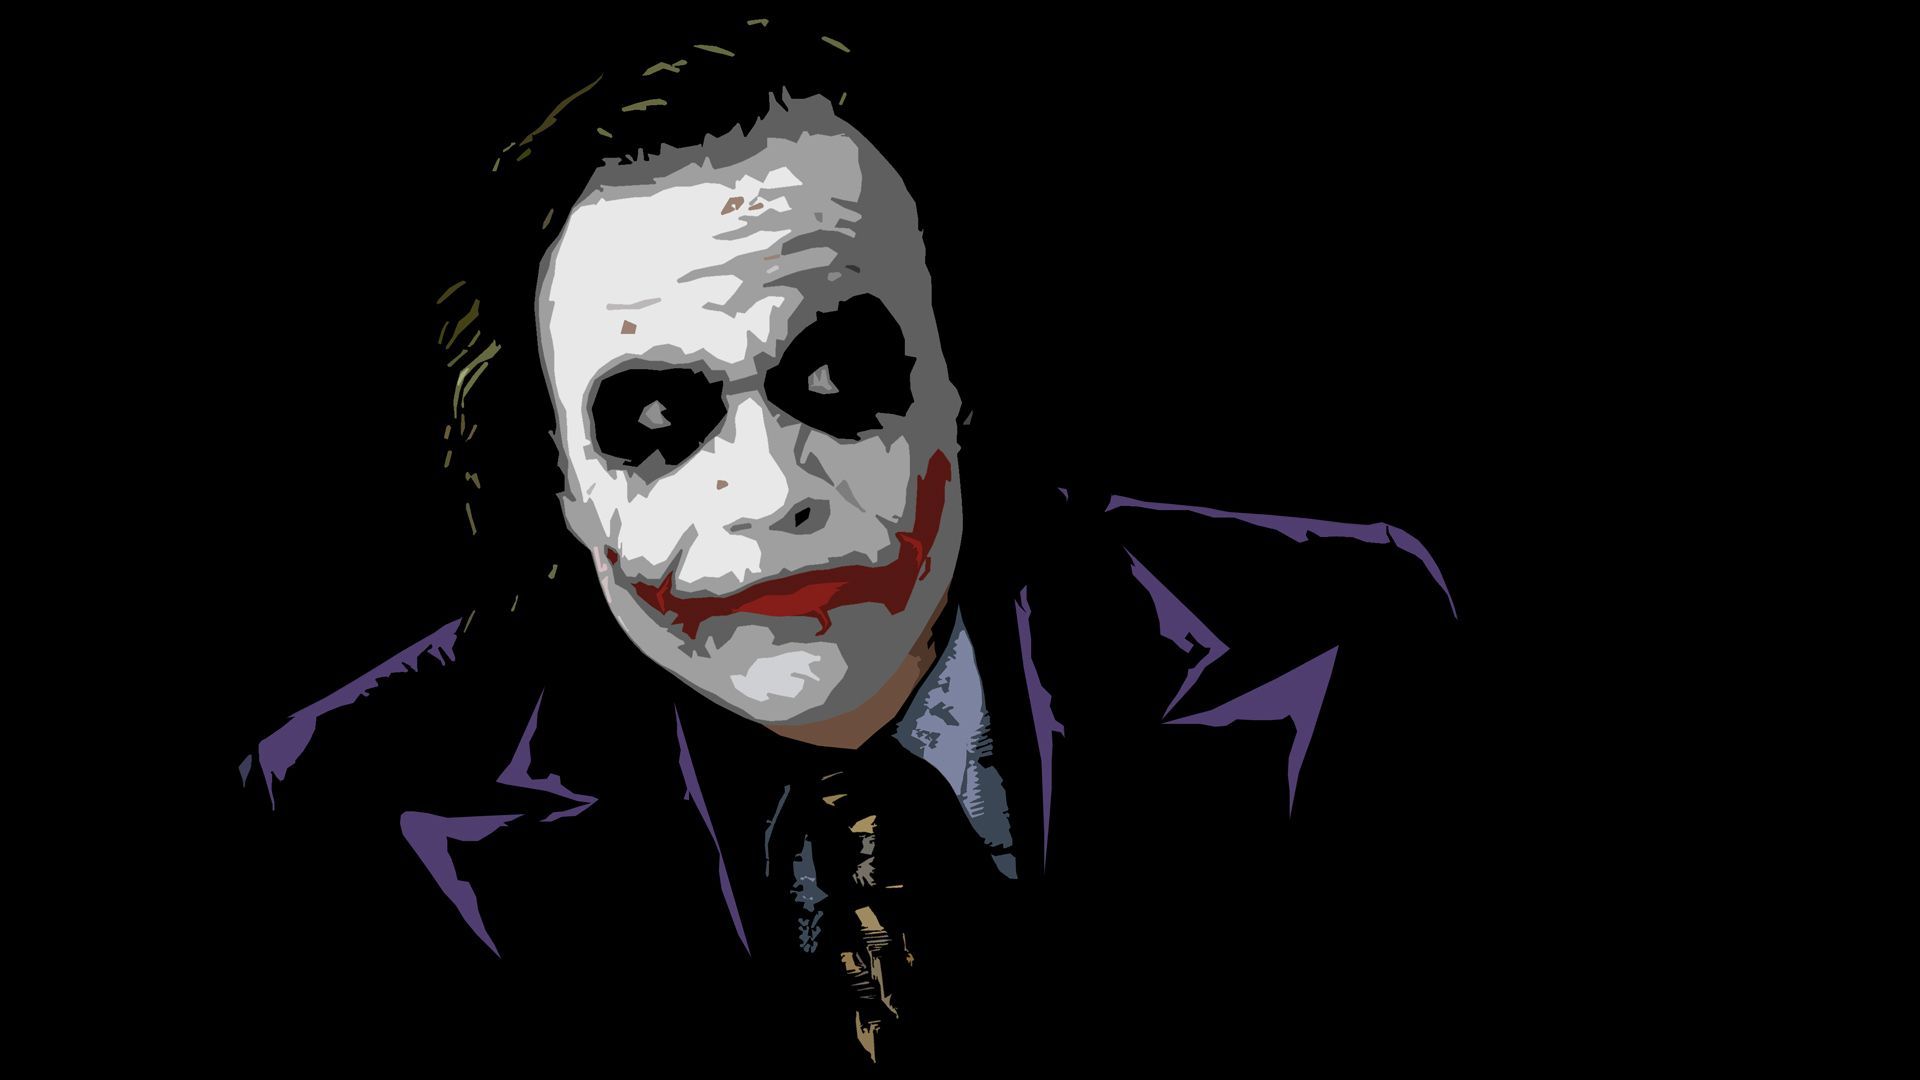 Free download The Joker The Dark Knight wallpaper 20391 [1920x1080] for